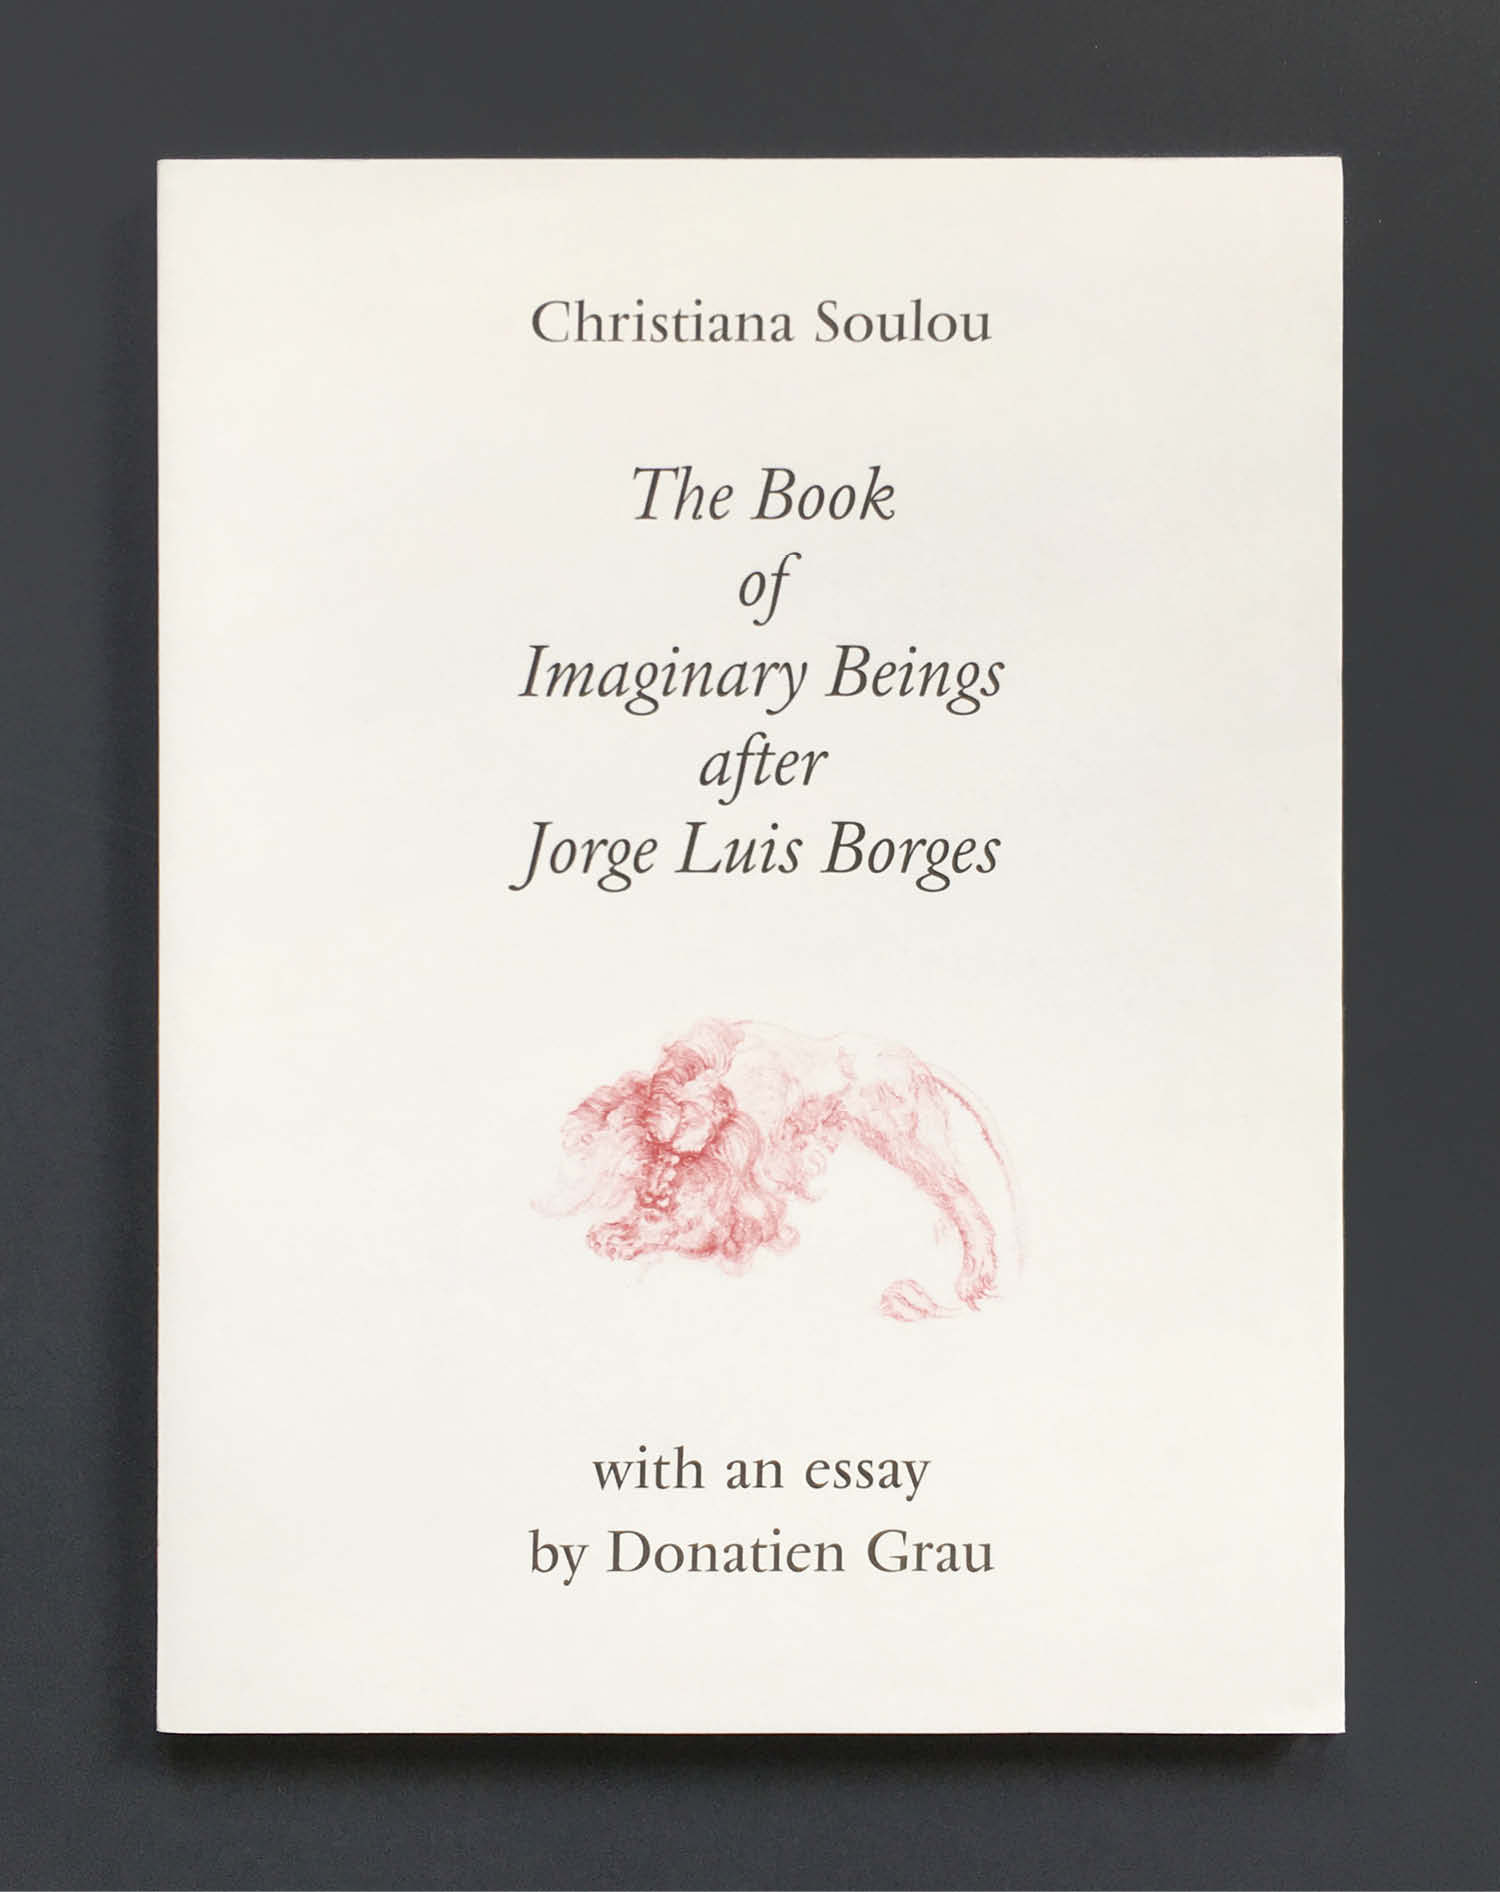 Christiana Soulou, The Book of Imaginary Beings after Jorge Luis Borges exhibition catalogue for Sadie Coles HQ